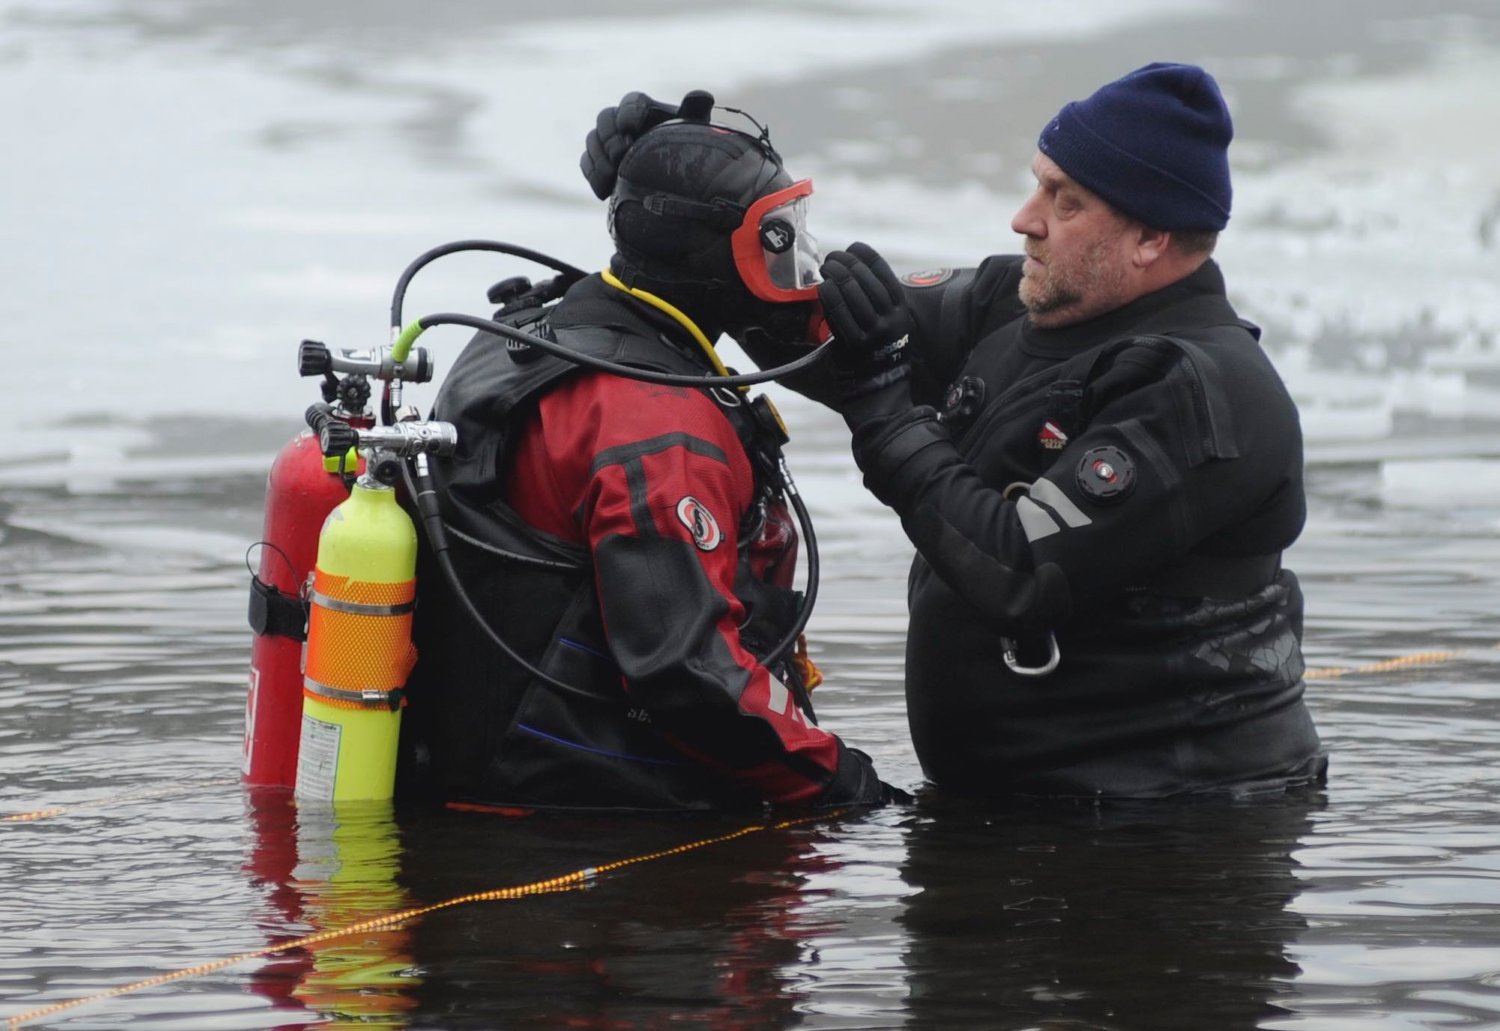 Brian Hulstlander of the Bloomingburg Fire Department served as the backup diver during the operation to pull a submerged four-wheeler out of the ice-covered lake. He is pictured having his diving equipment double checked by Joe Ratner, captain of the dive and rescue team.